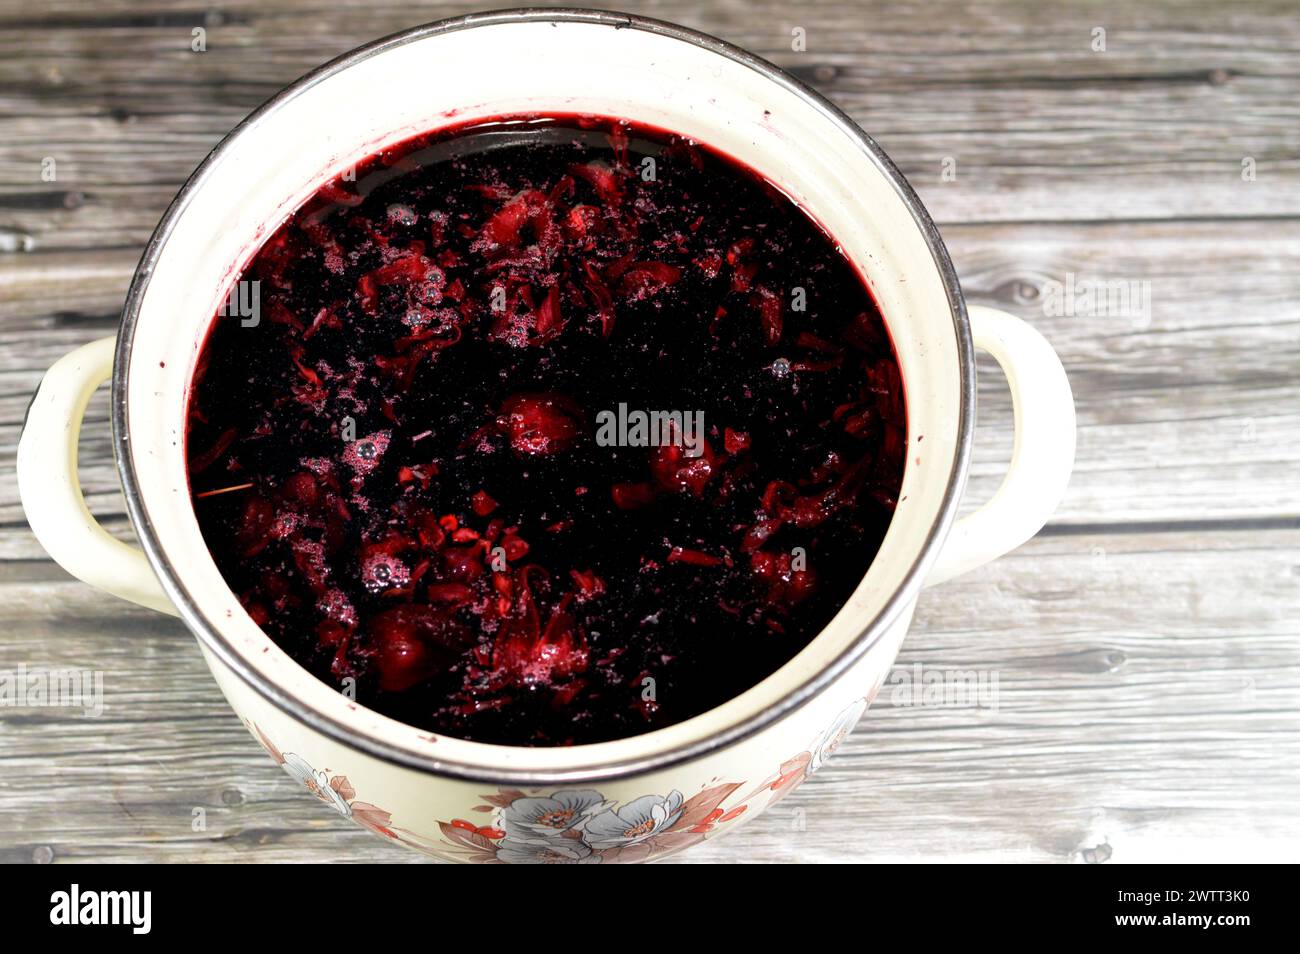 boiled roselle herbs in water, a dark red-purple colored bissap wonjo natural herbs, flowers of the Roselle plant Hibiscus used to prepare Roselle Jui Stock Photo